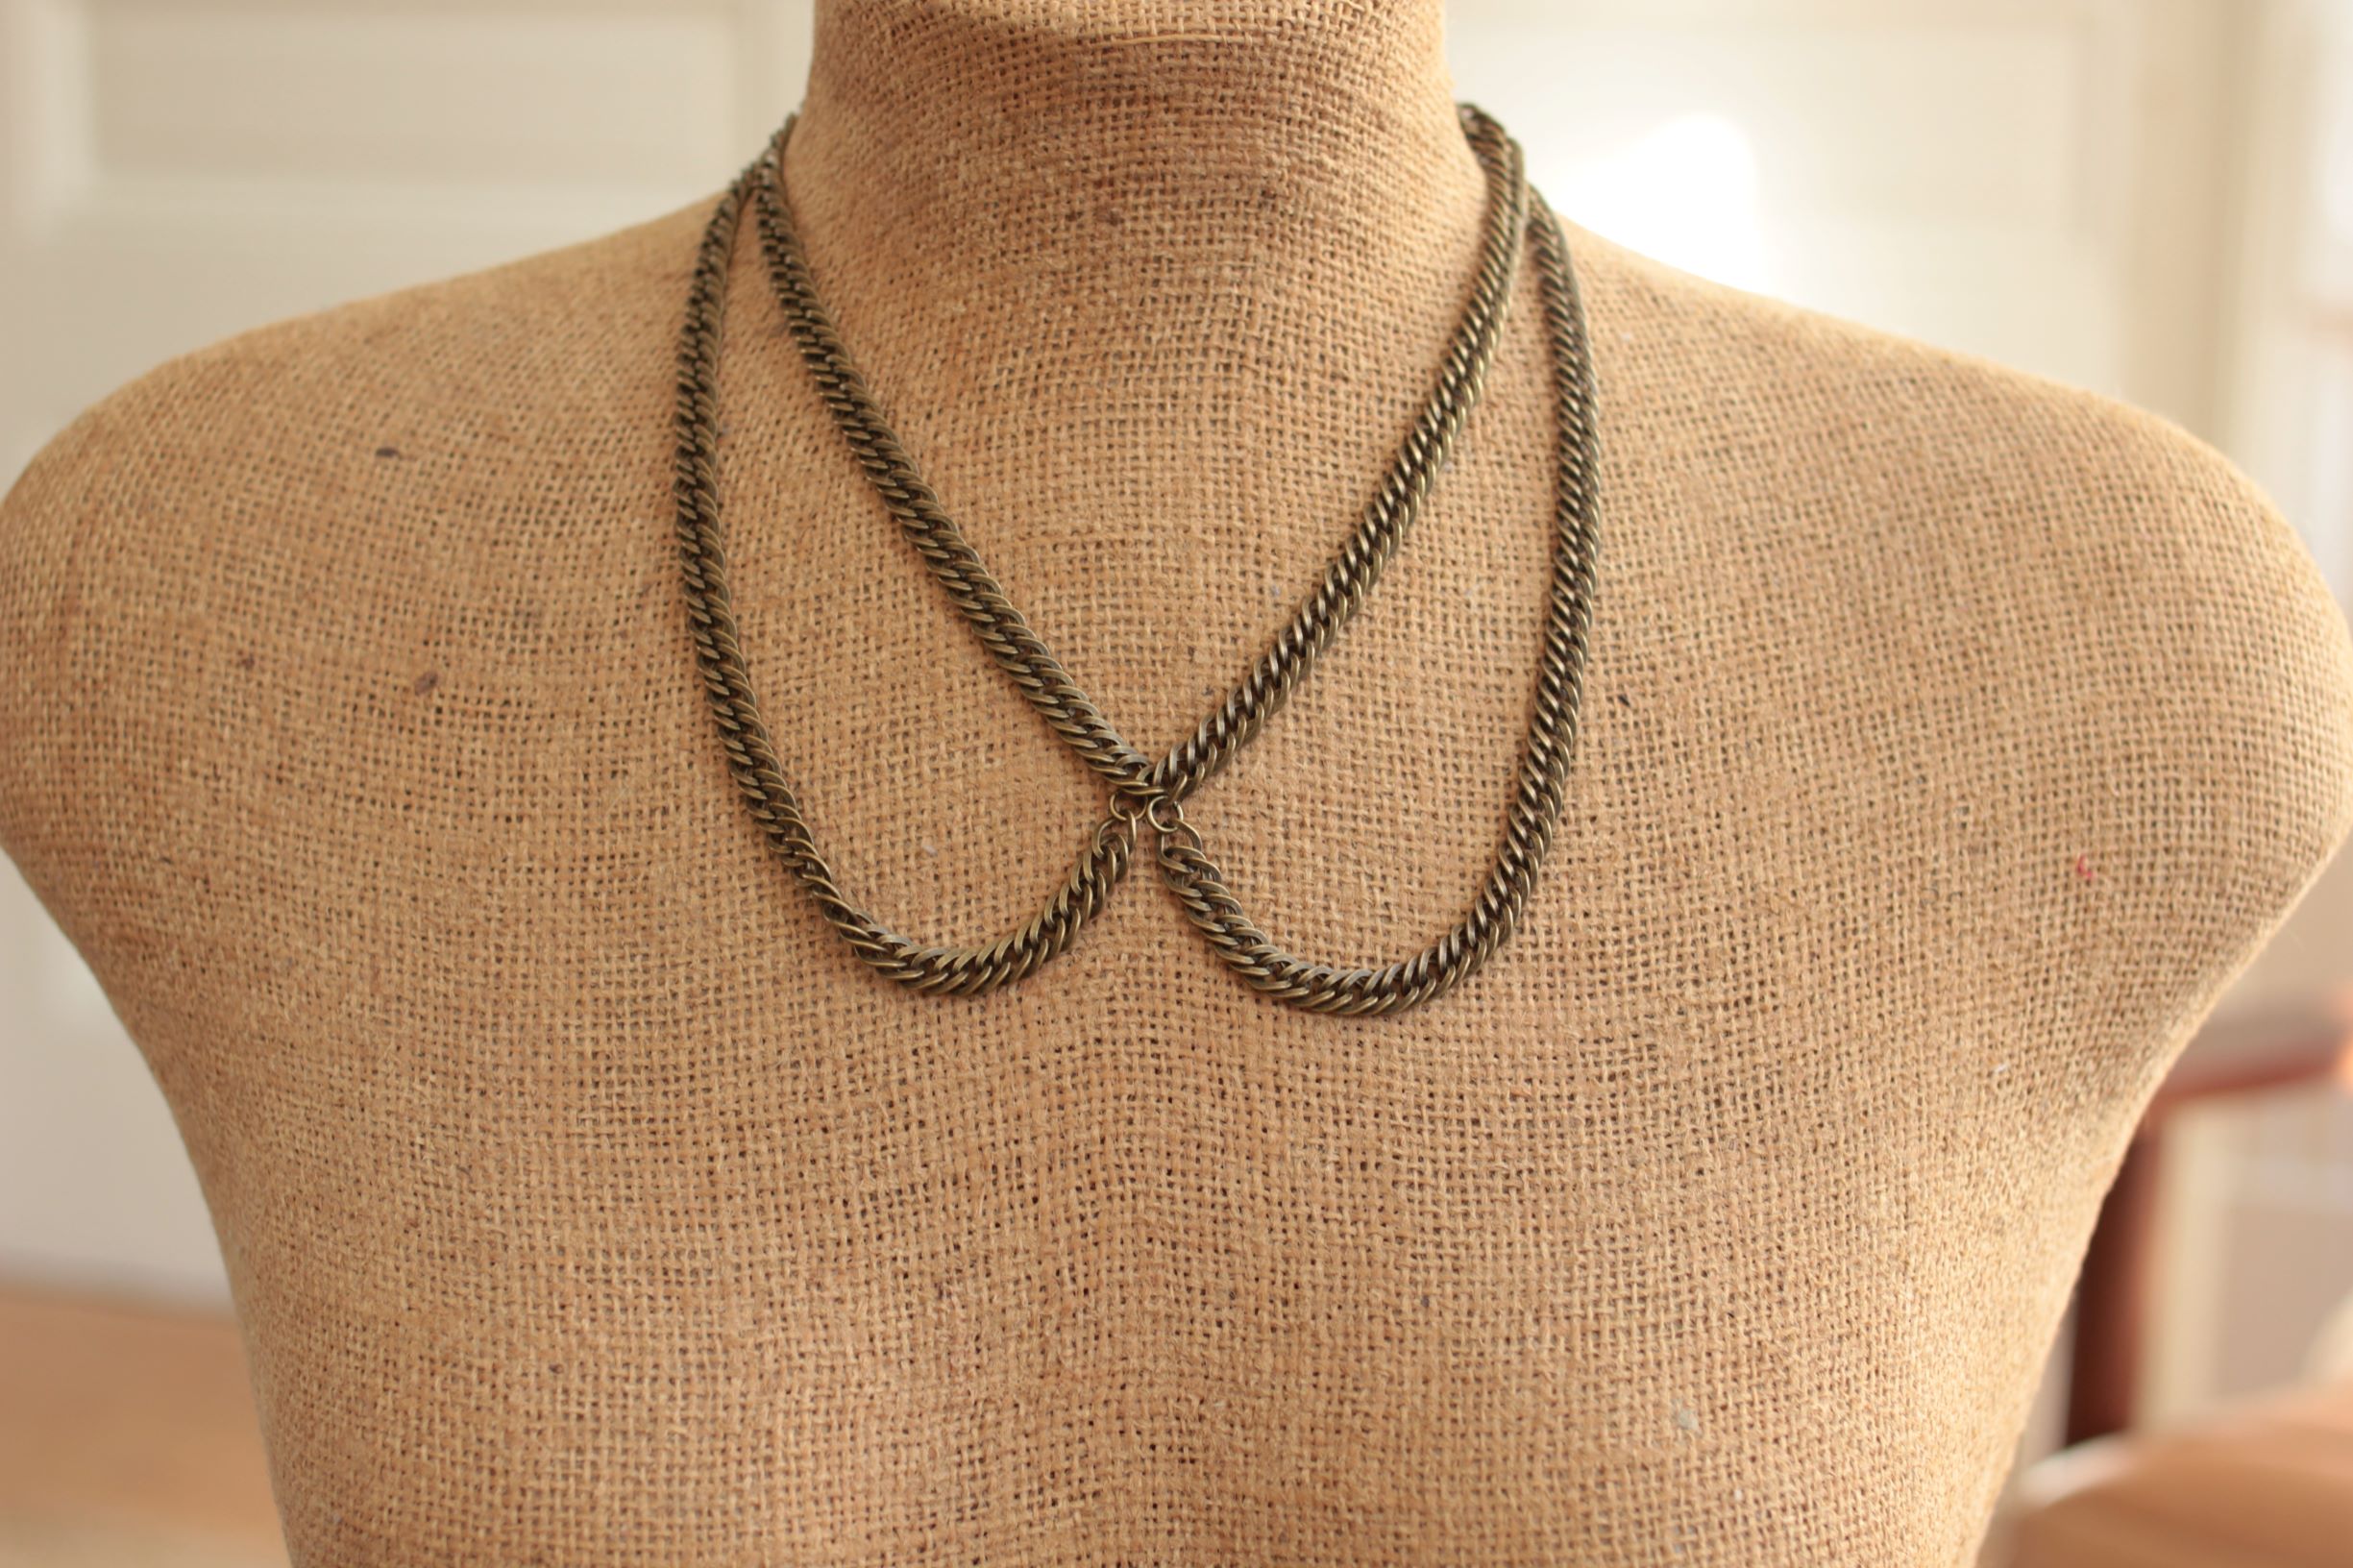 Peter pan collar necklace made with brass chain